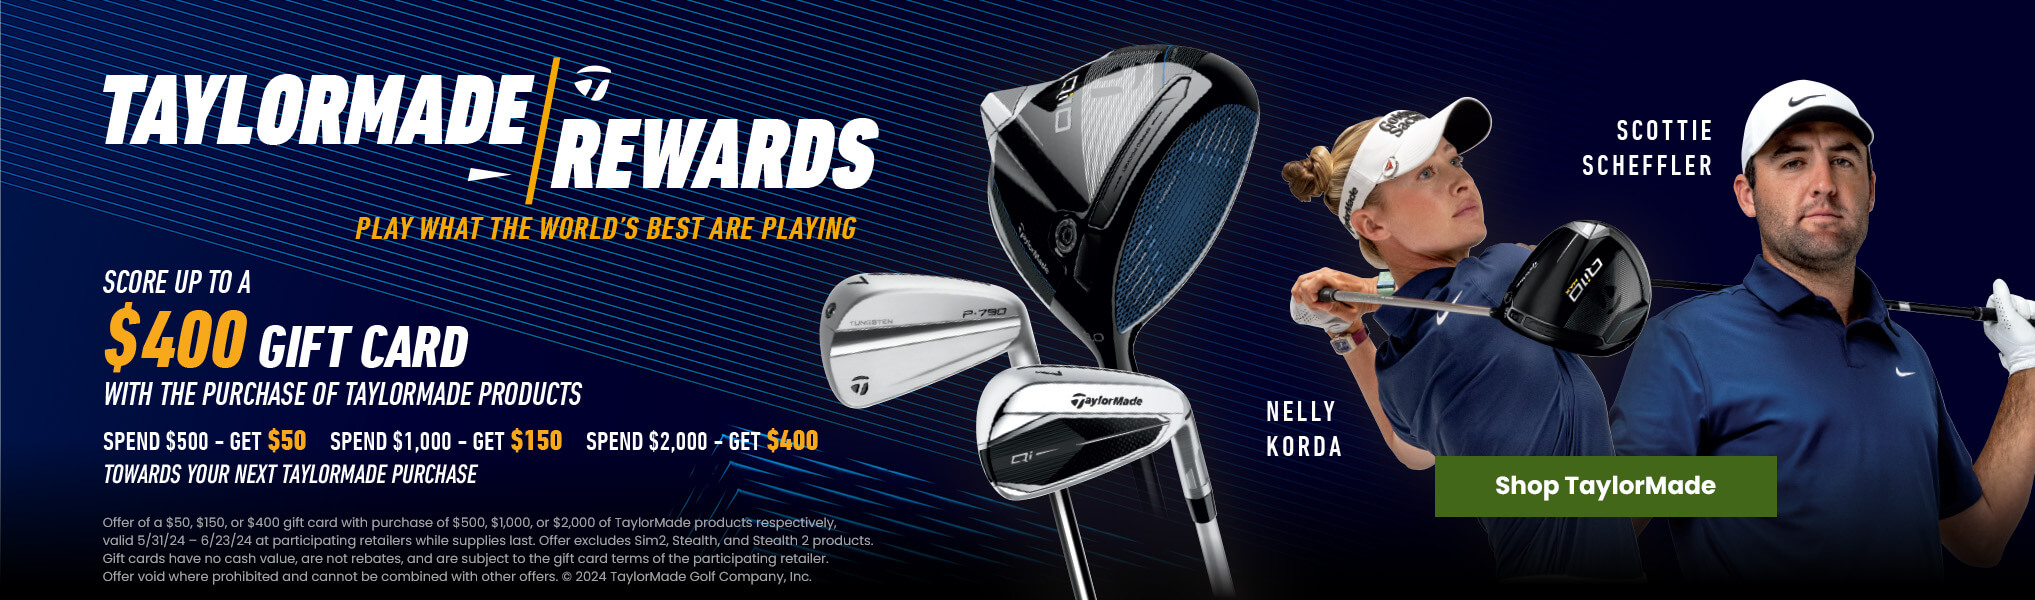 Limited Time Offer from TaylorMade